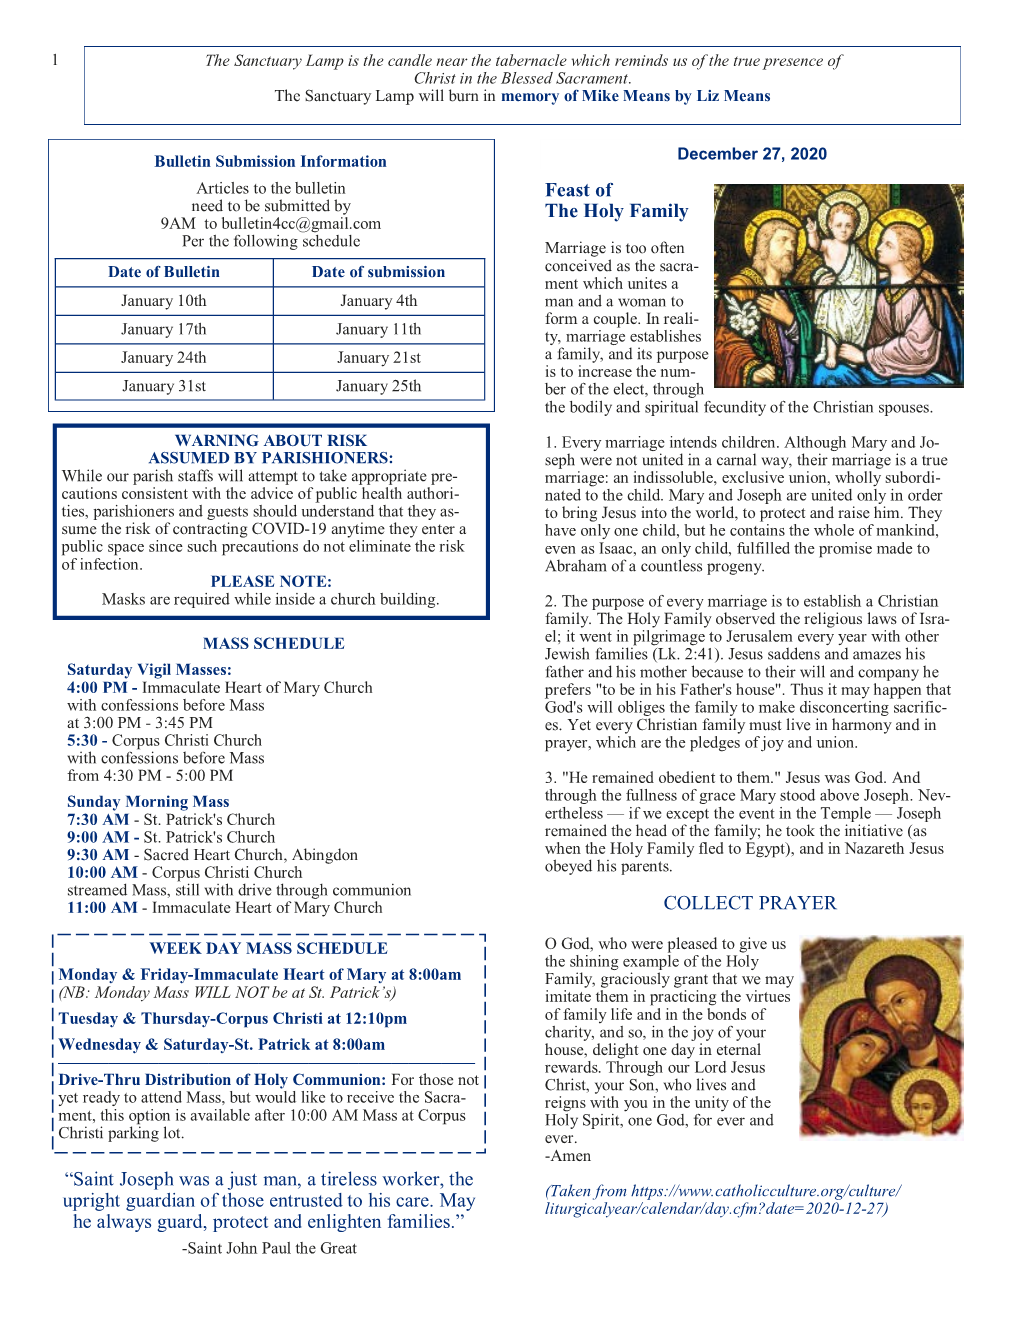 Feast of the Holy Family COLLECT PRAYER